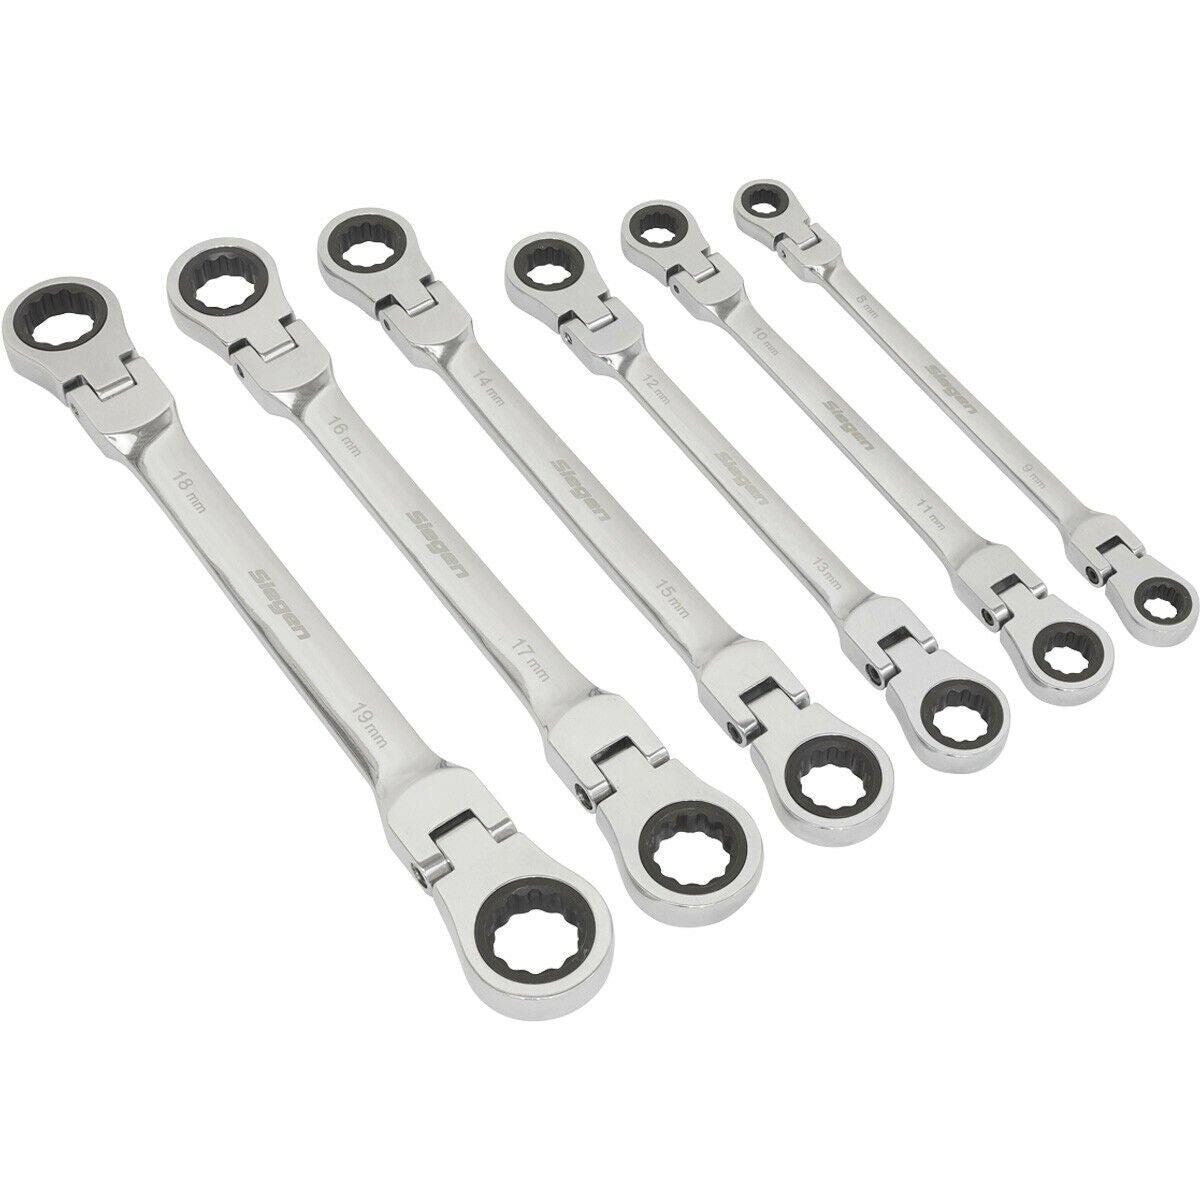 6pc Flexible Head Double Ended Ratchet Ring Spanner Set - 12 Point Metric Wrench